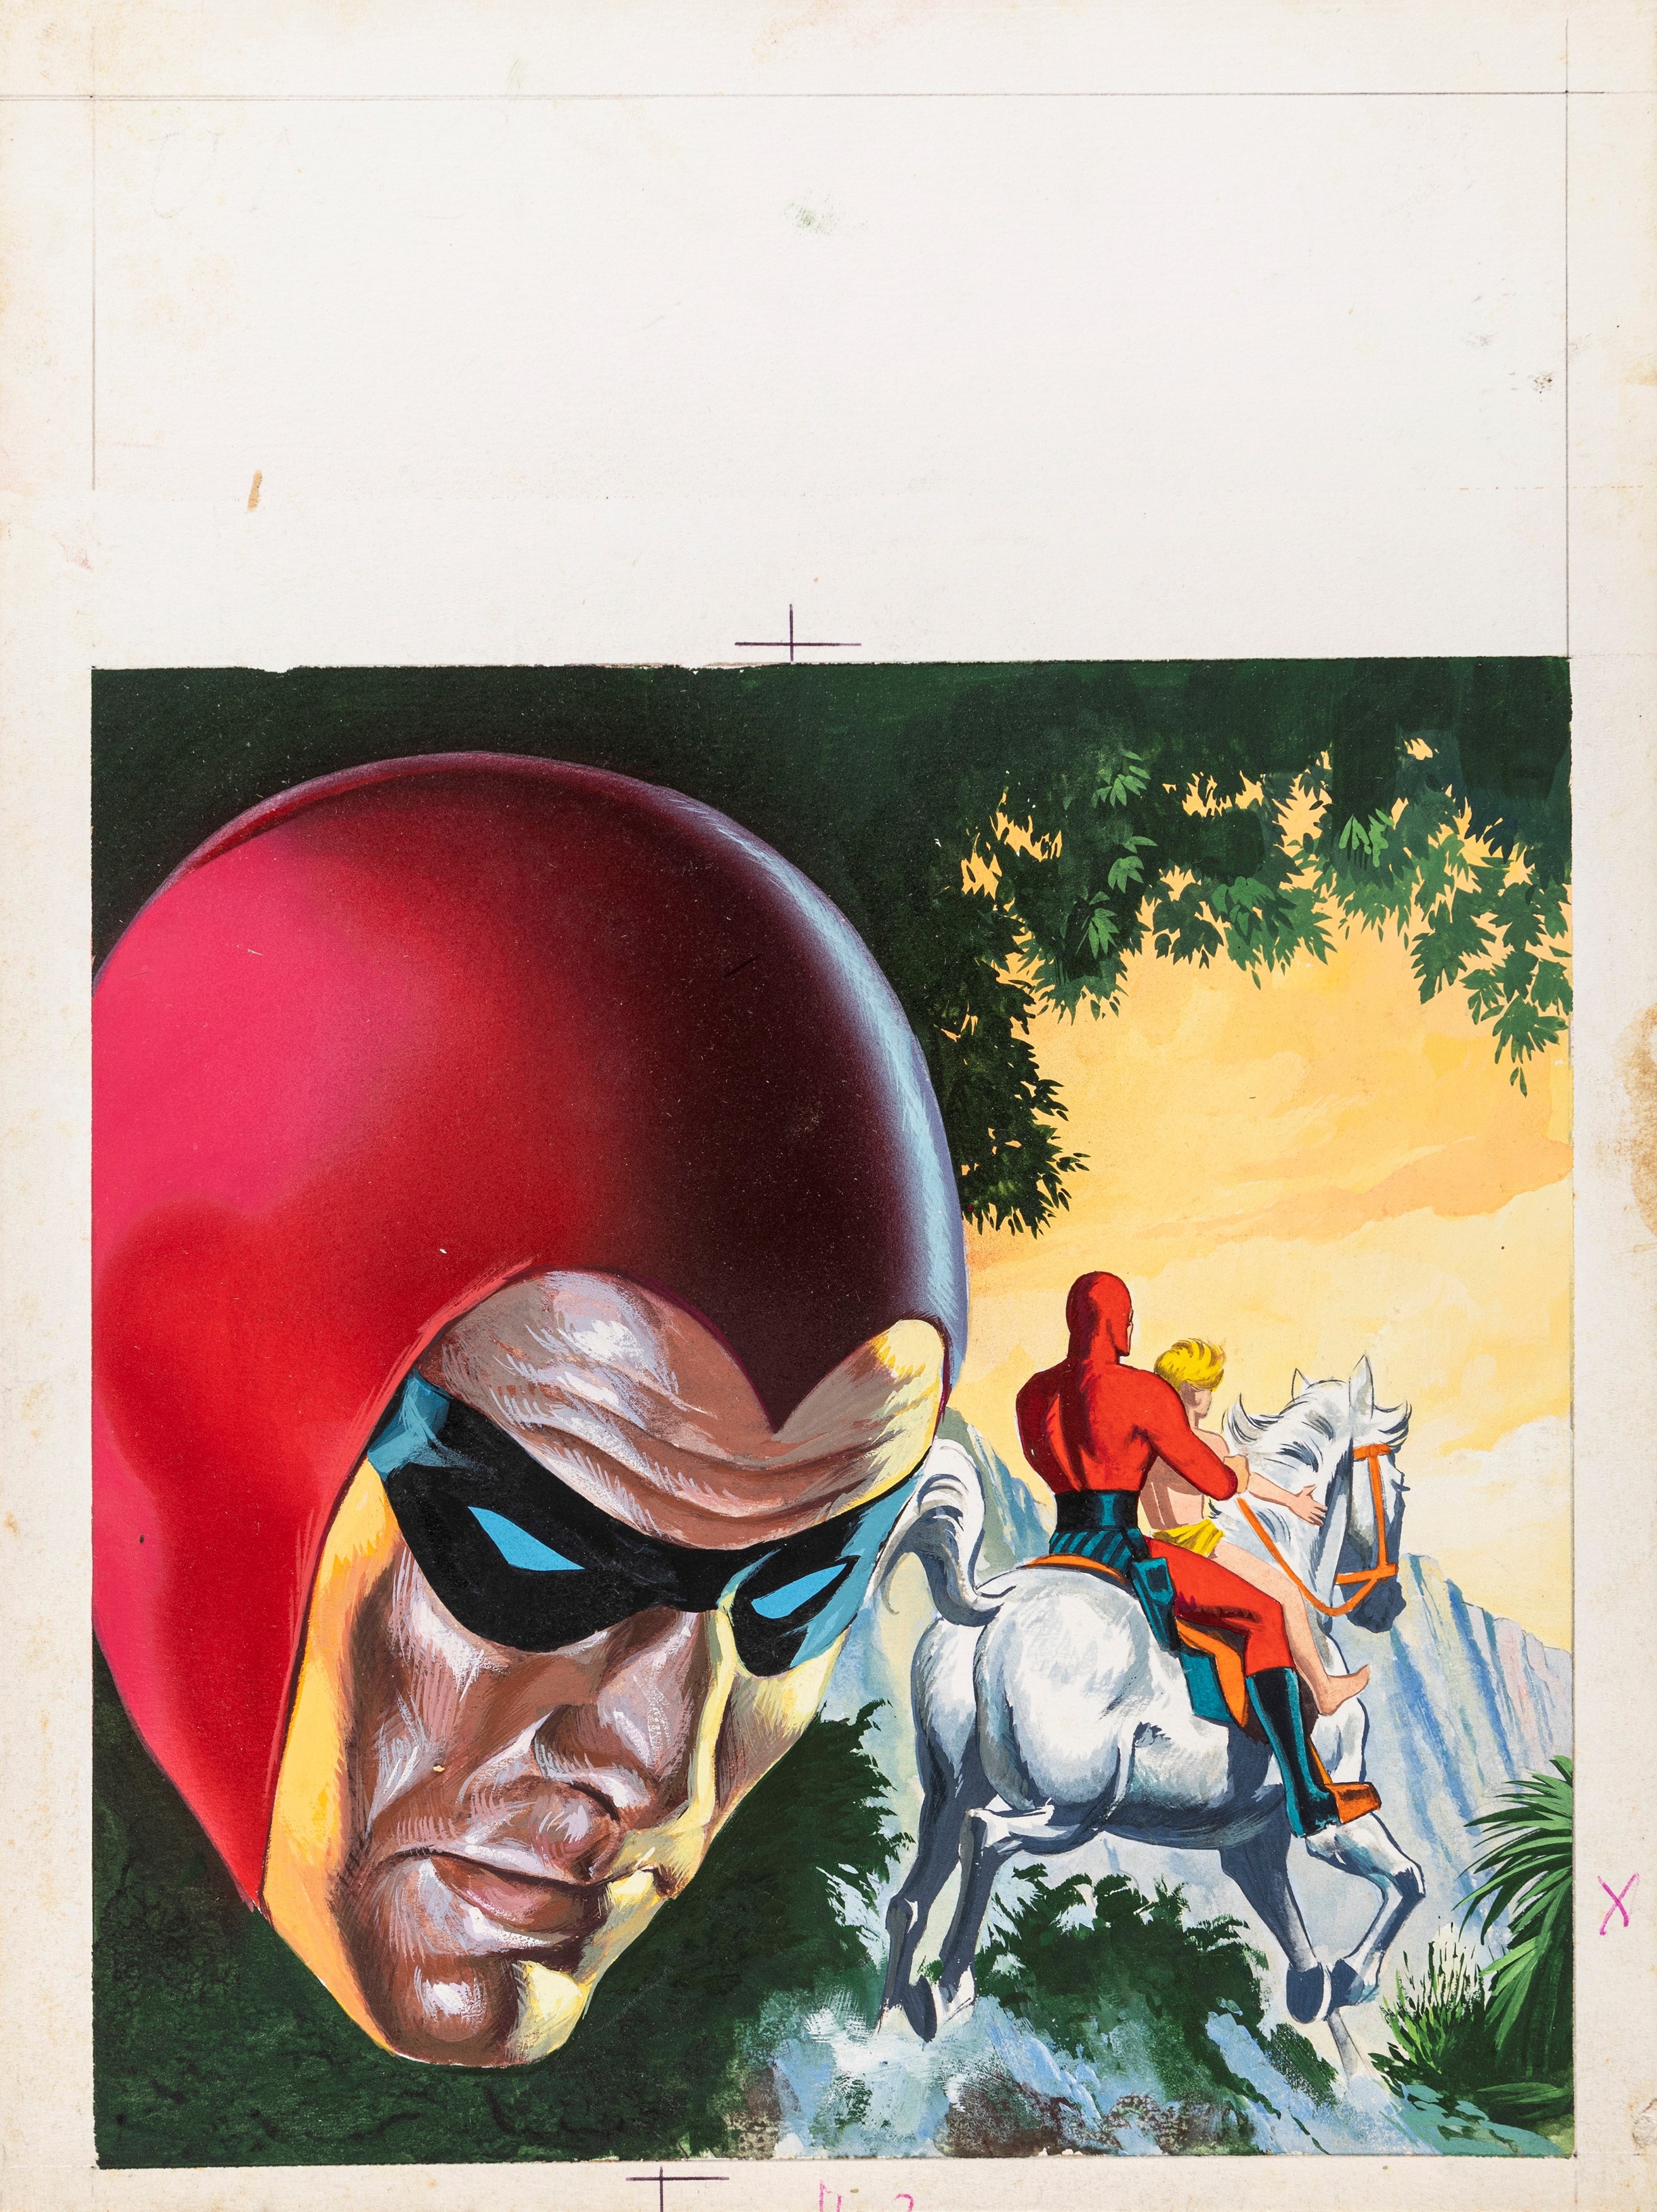 Le Fantôme - The red nemesis , 1971 by Mario Caria, 1971